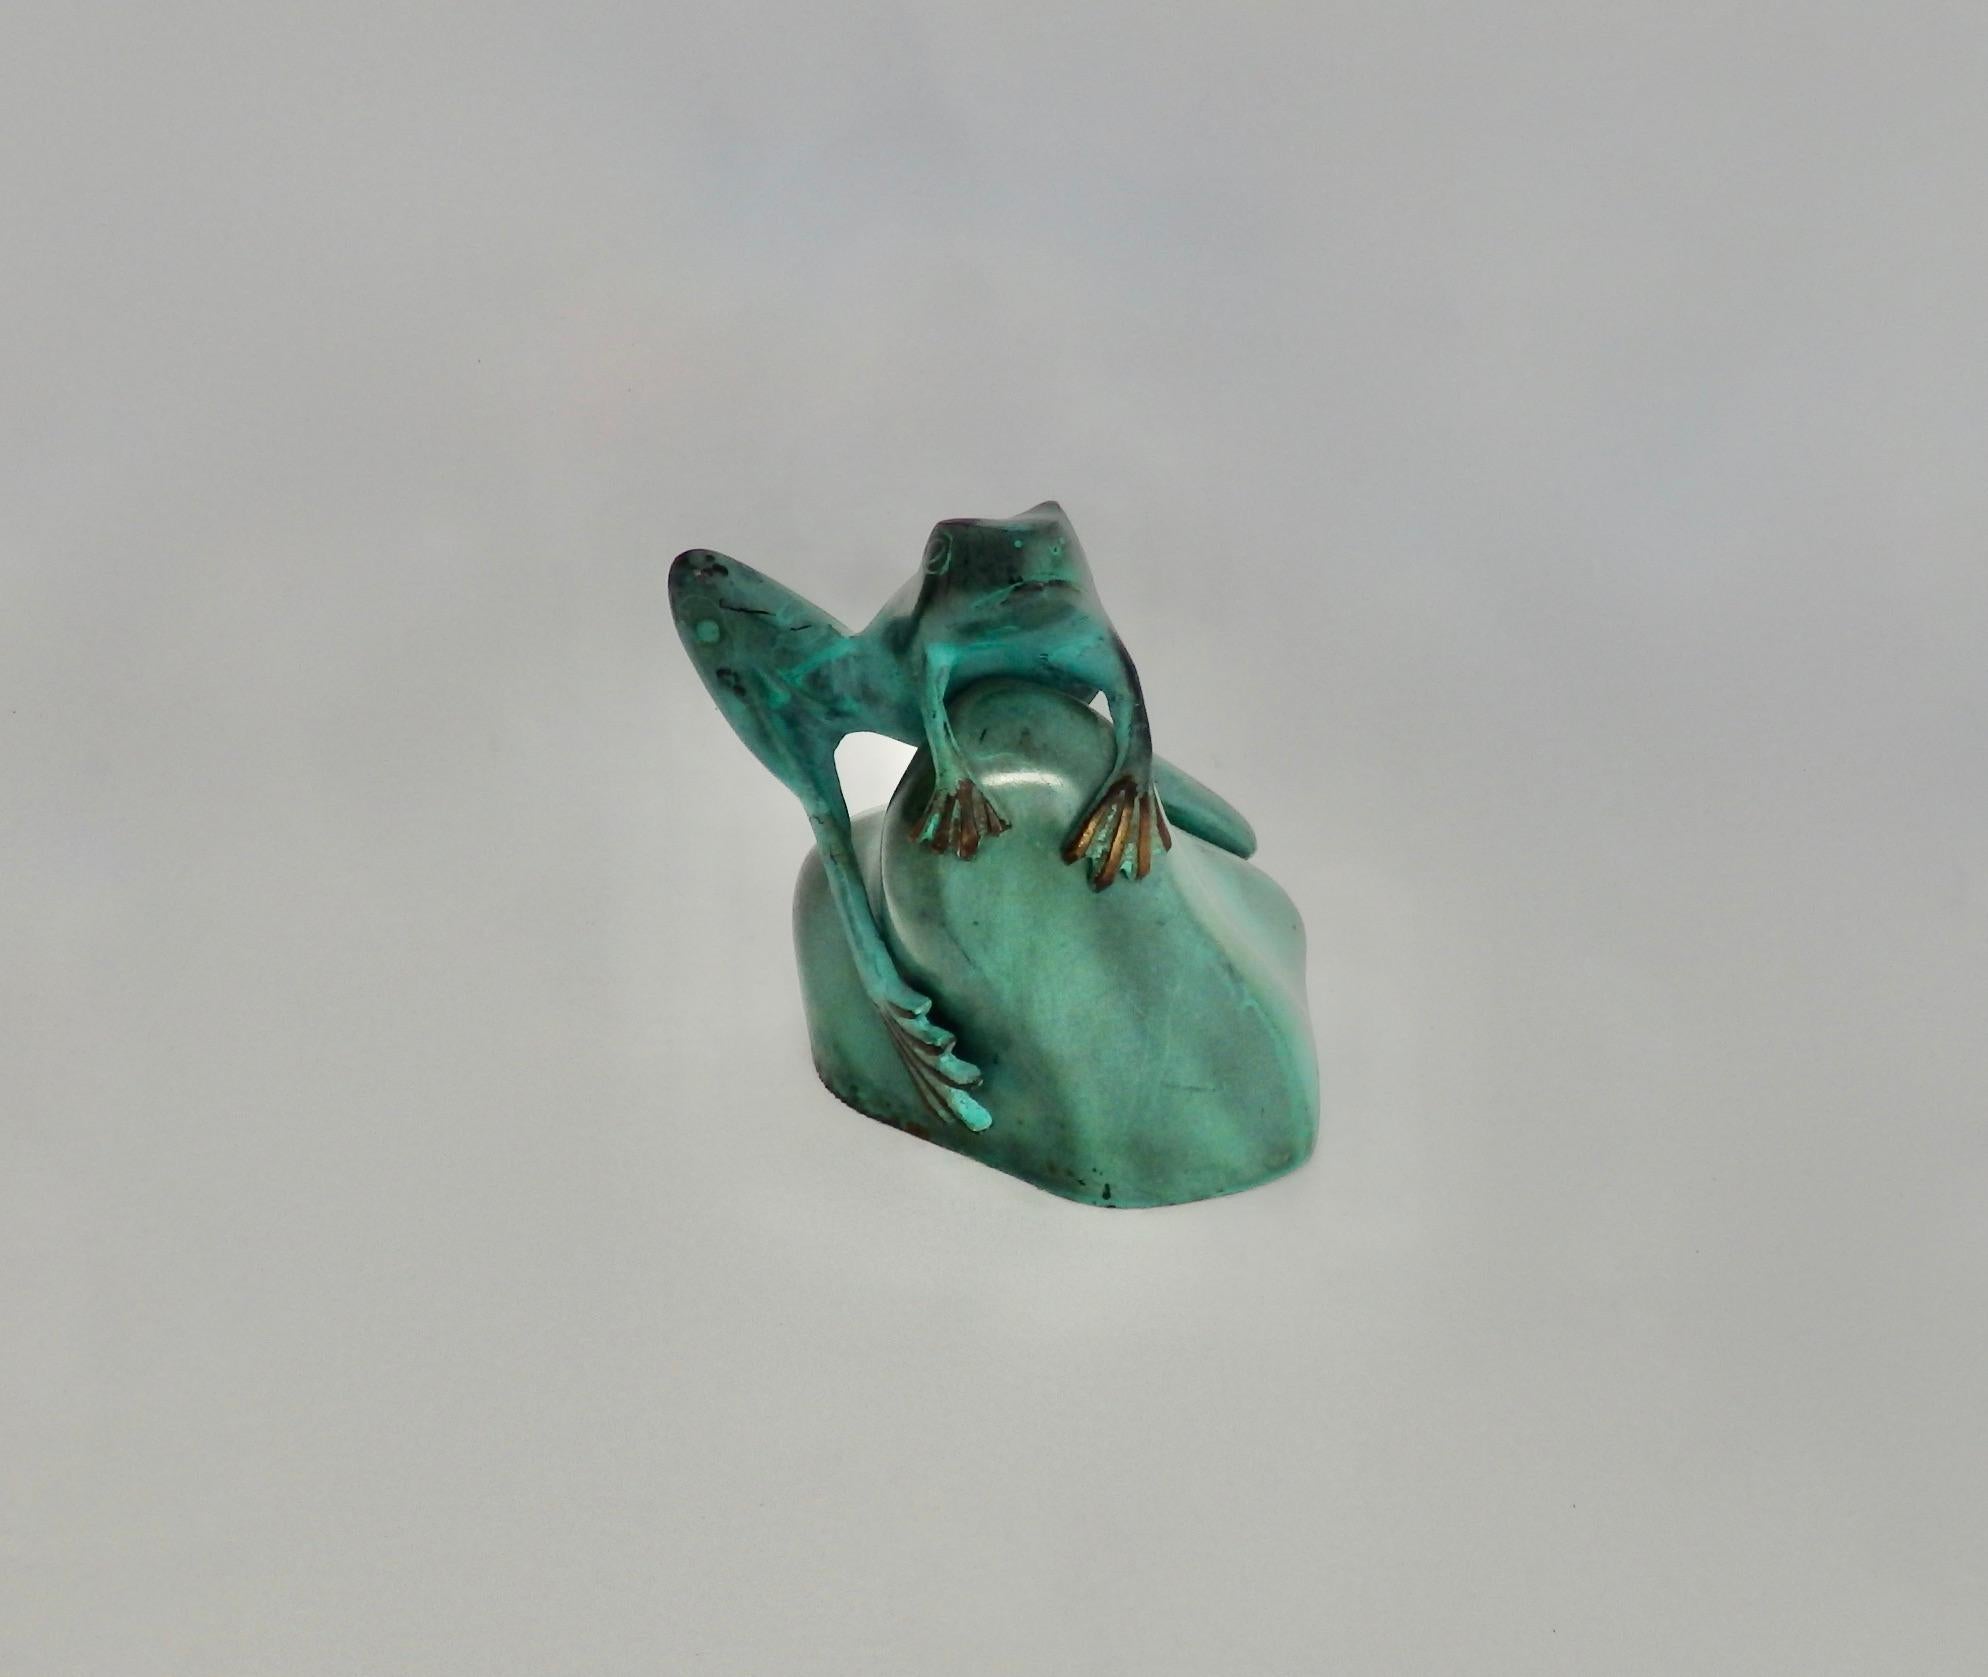 Green Patina'd bronze metal frog statue, style of Marshall Fredericks.